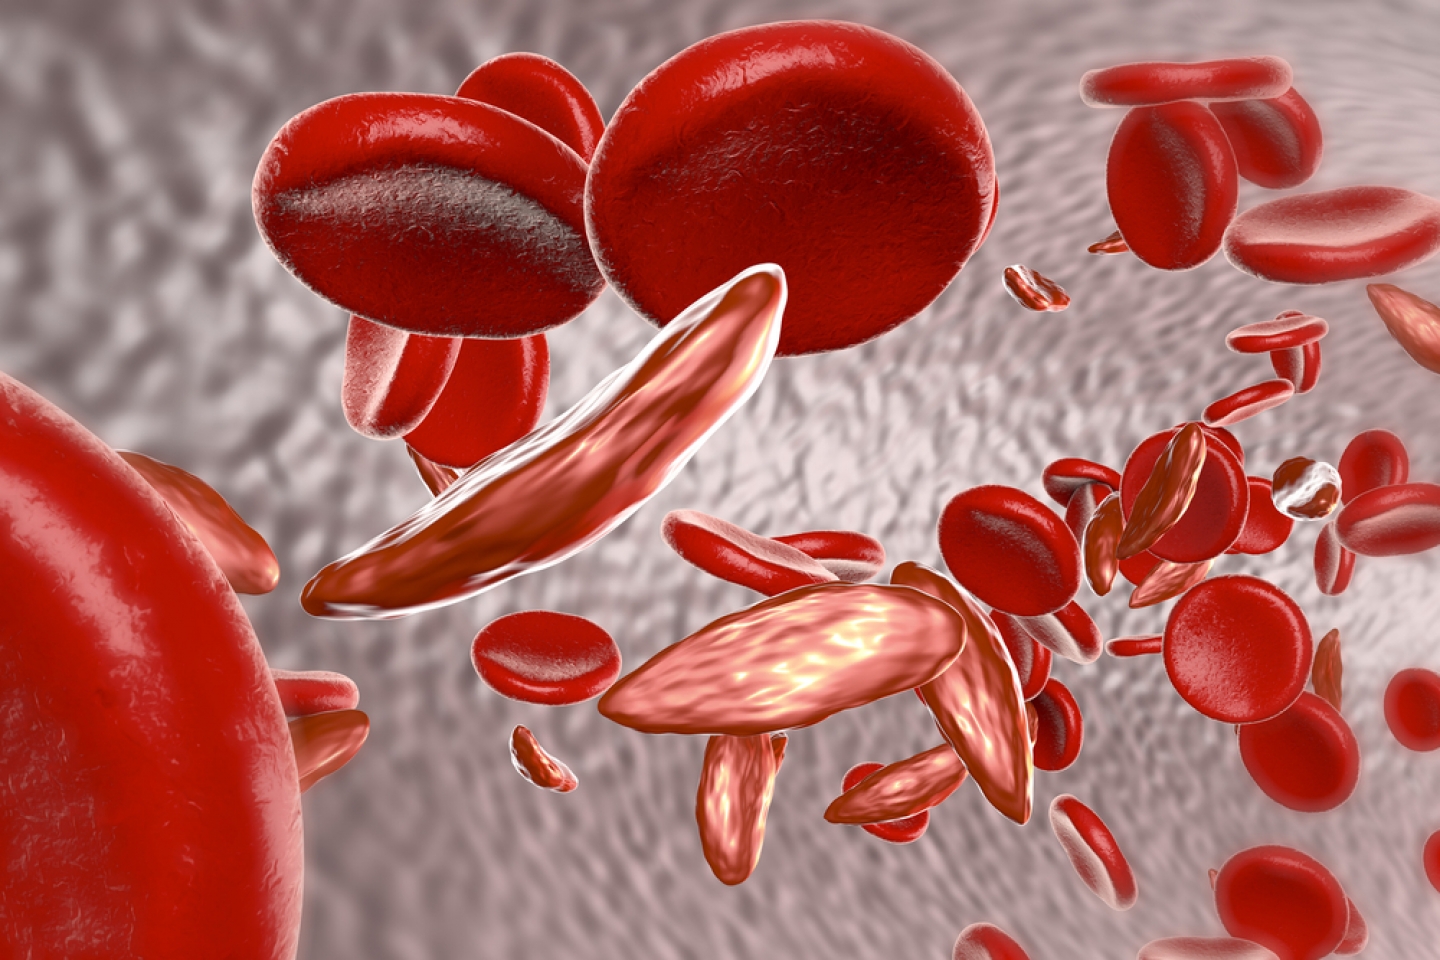 3D illustration of sickle cell disease